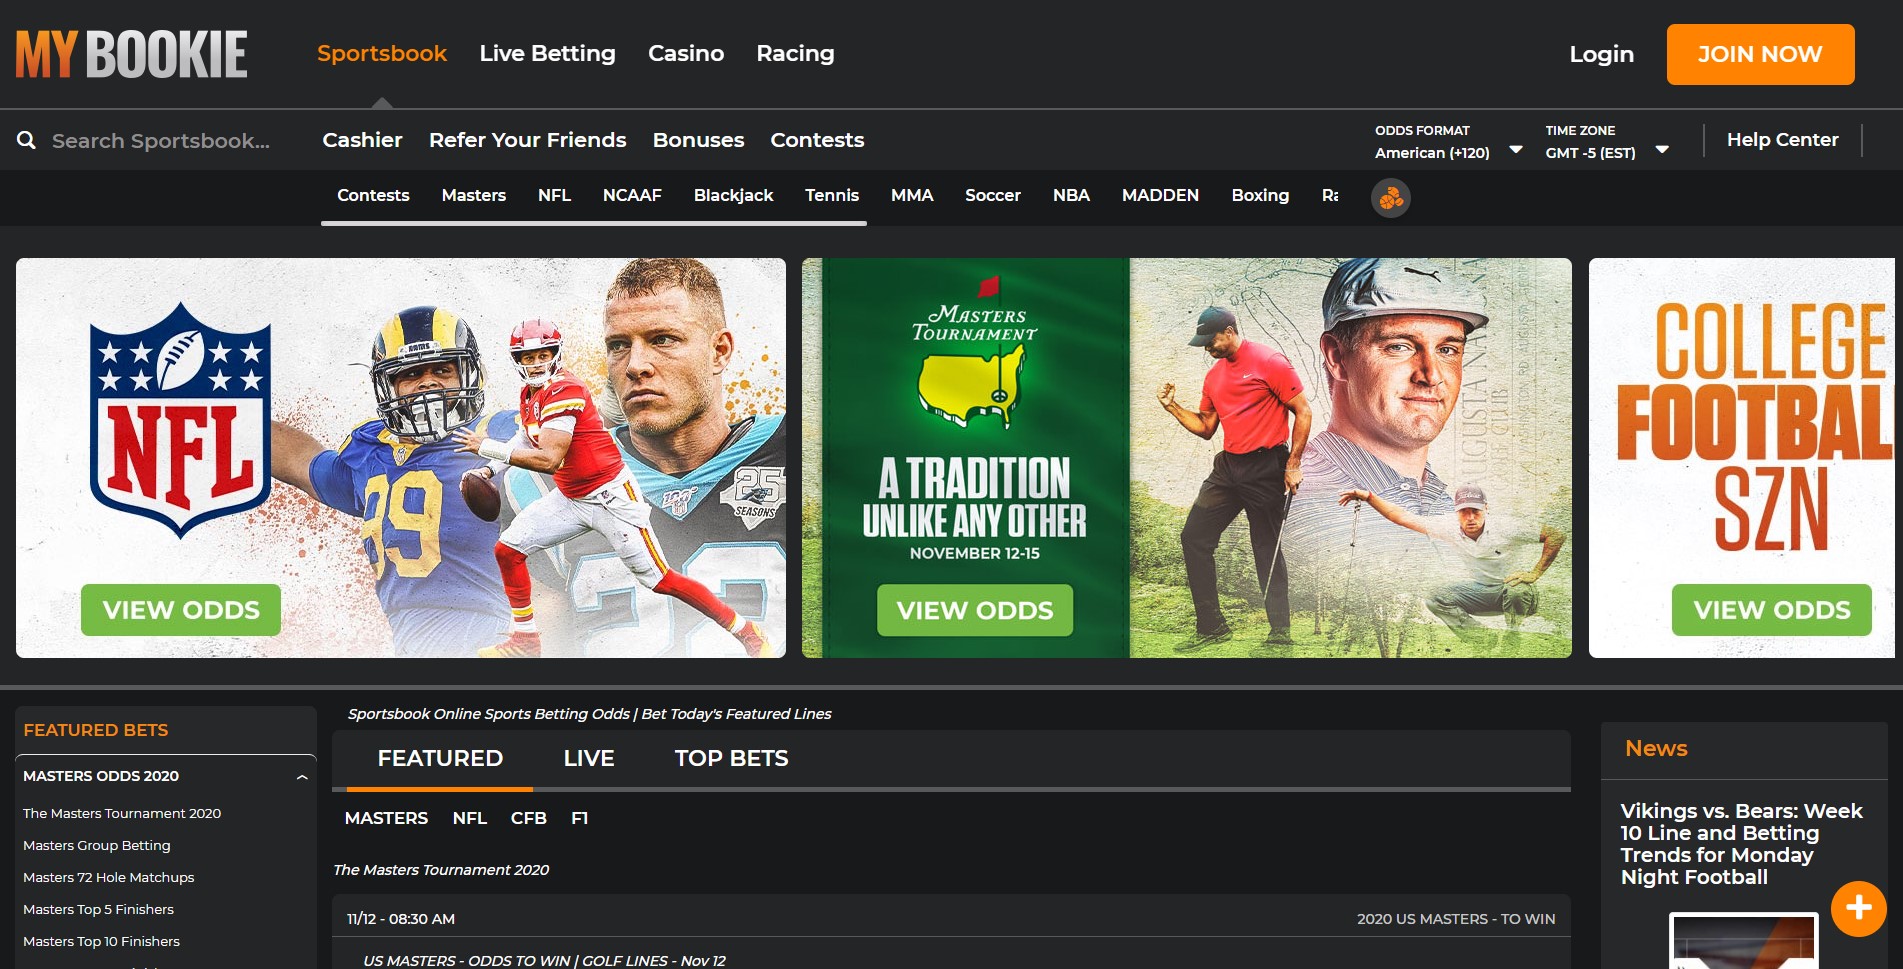 The homepage of the MyBookie sportsbook